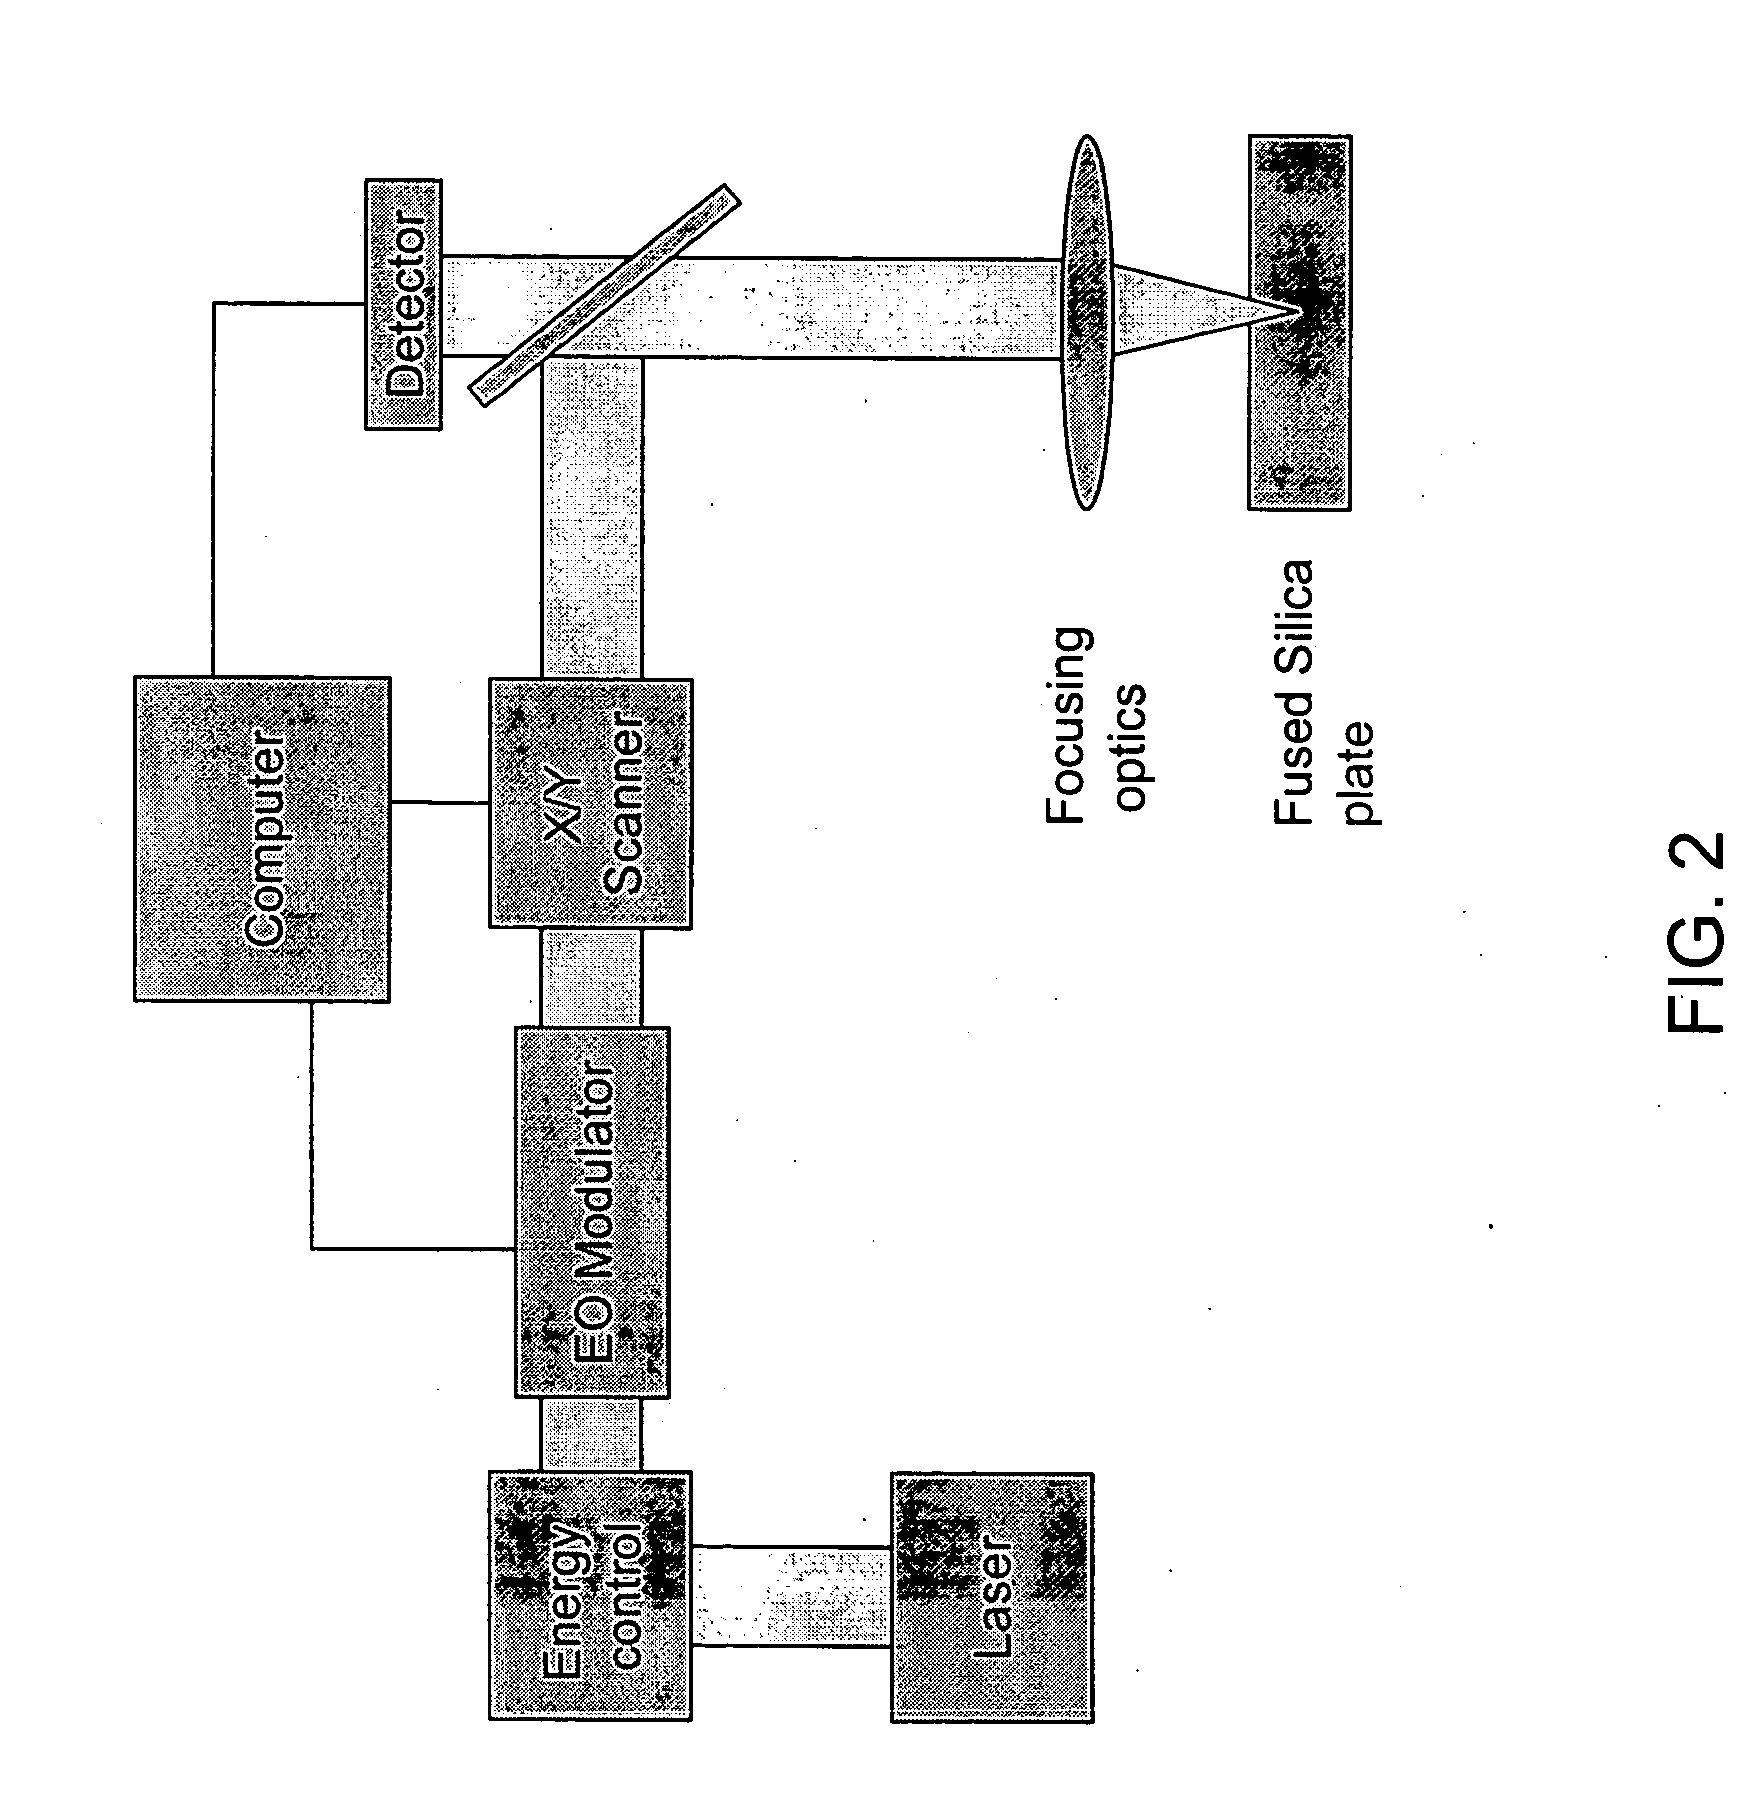 Apparatus and method for correction of abberations in laser system optics